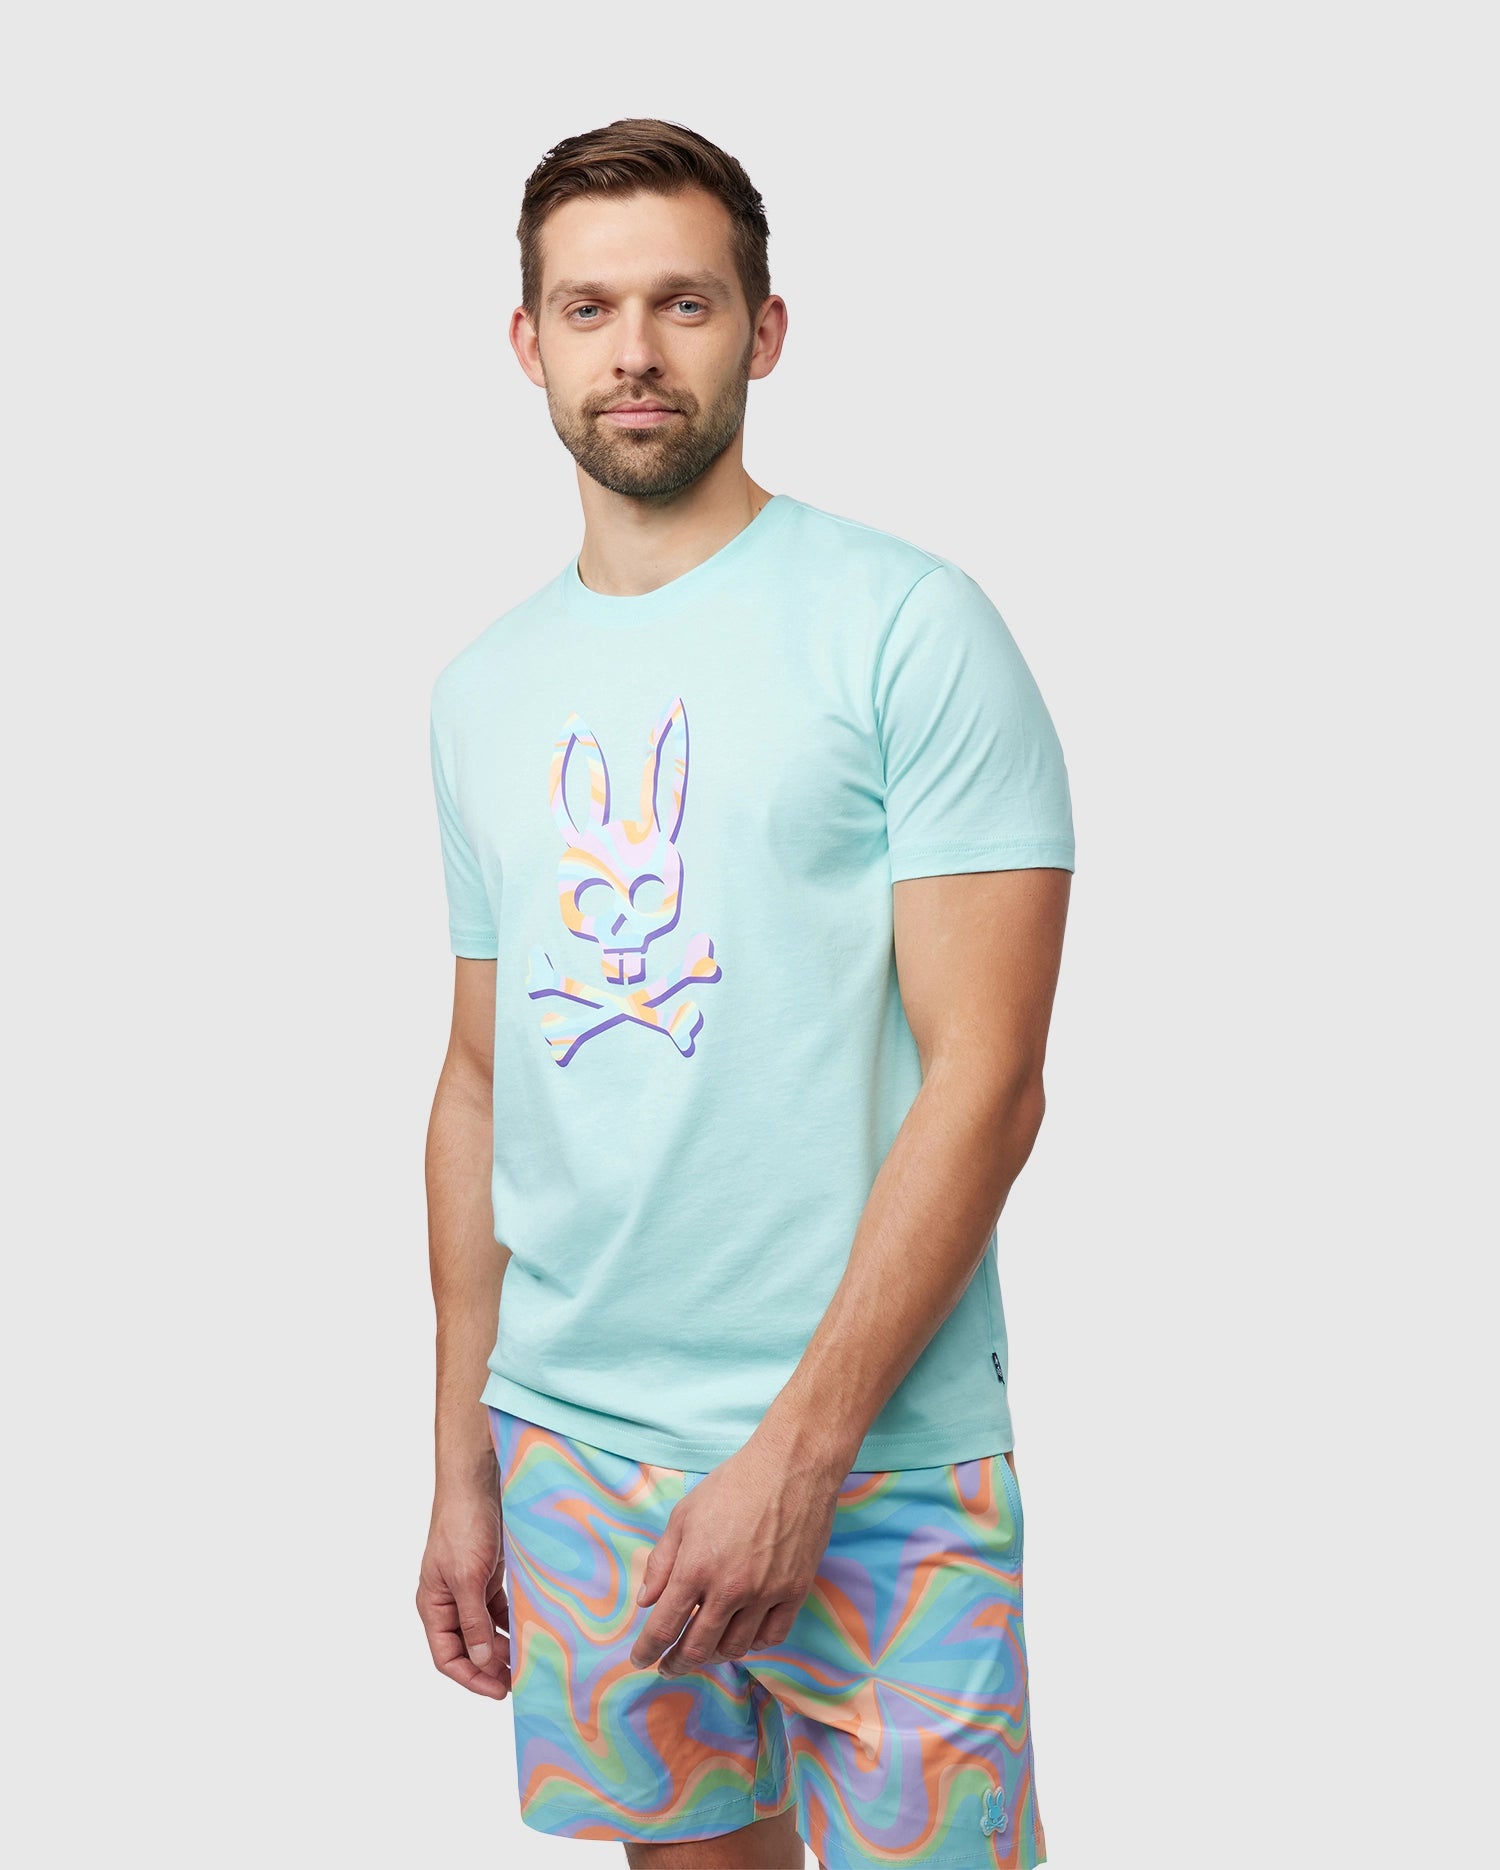 A man with short brown hair stands facing forward, wearing a light blue Psycho Bunny Pima cotton t-shirt with a bunny design and colorful space-dyed shorts. He has a subtle smile and looks directly at the camera.